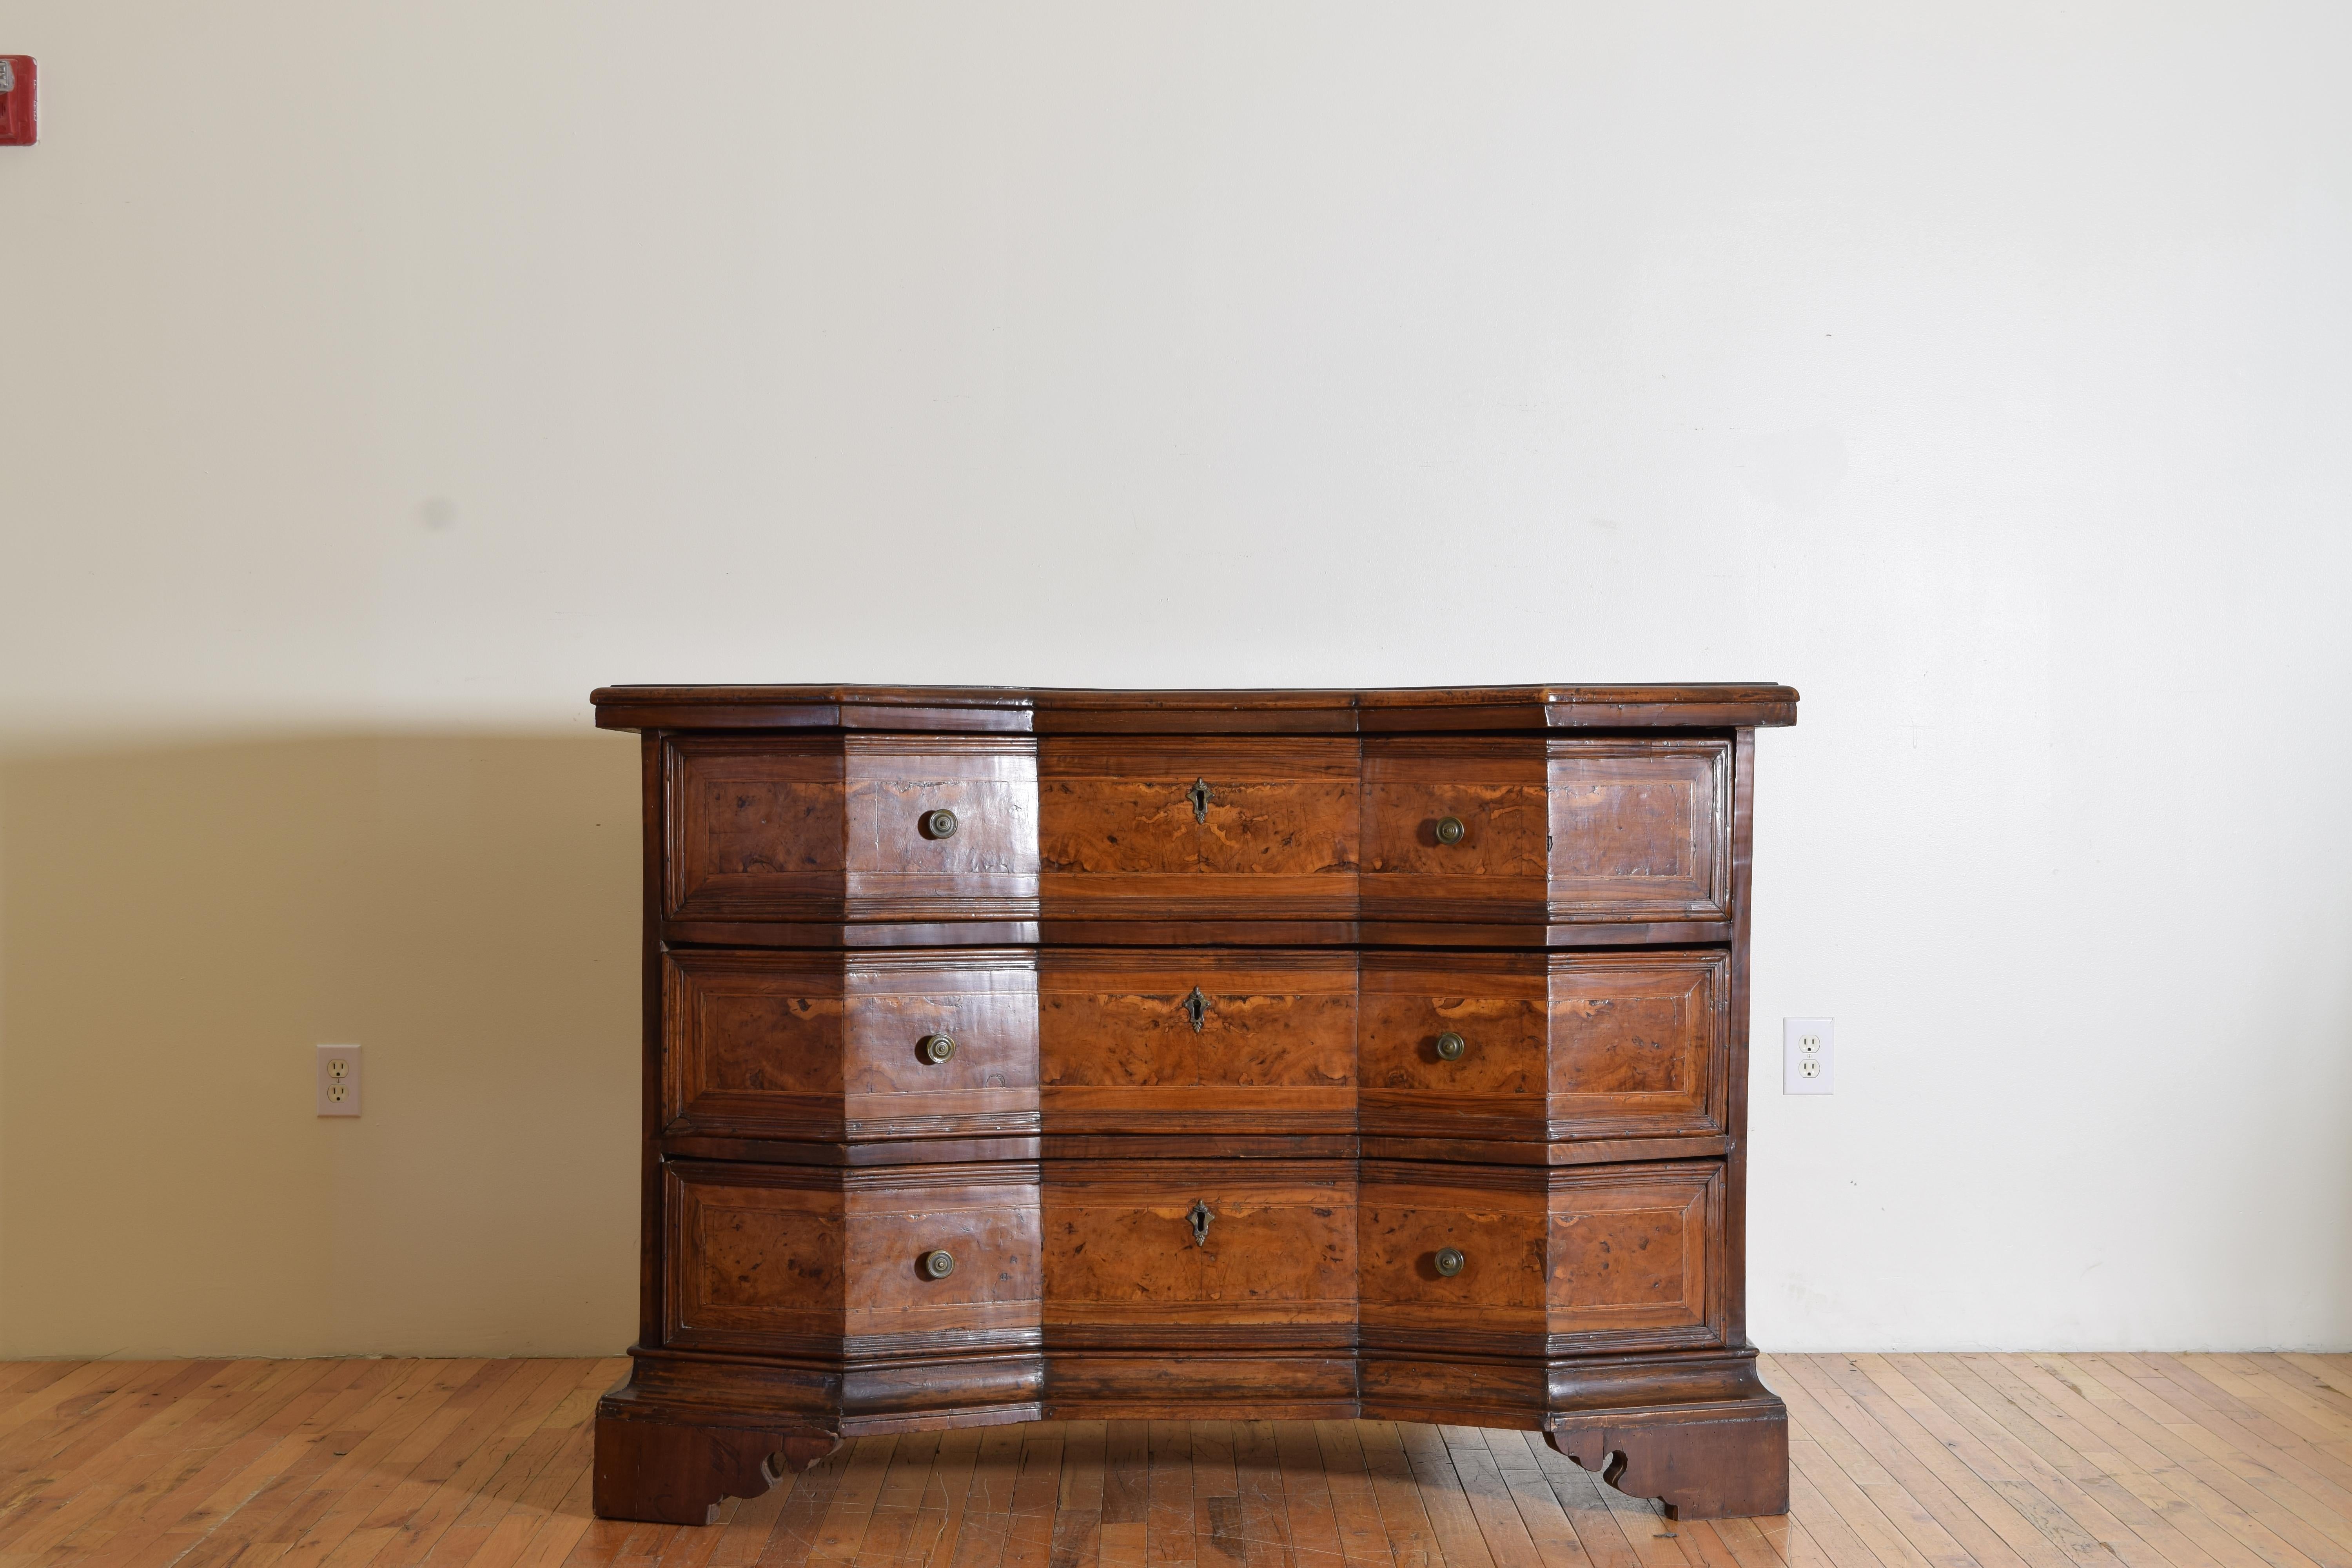 Having a shaped top with canted corners and a recessed center and a molded edge, the drawer fronts all covered in burl walnut veneer and retaining antique hardware, raised on bracket feet